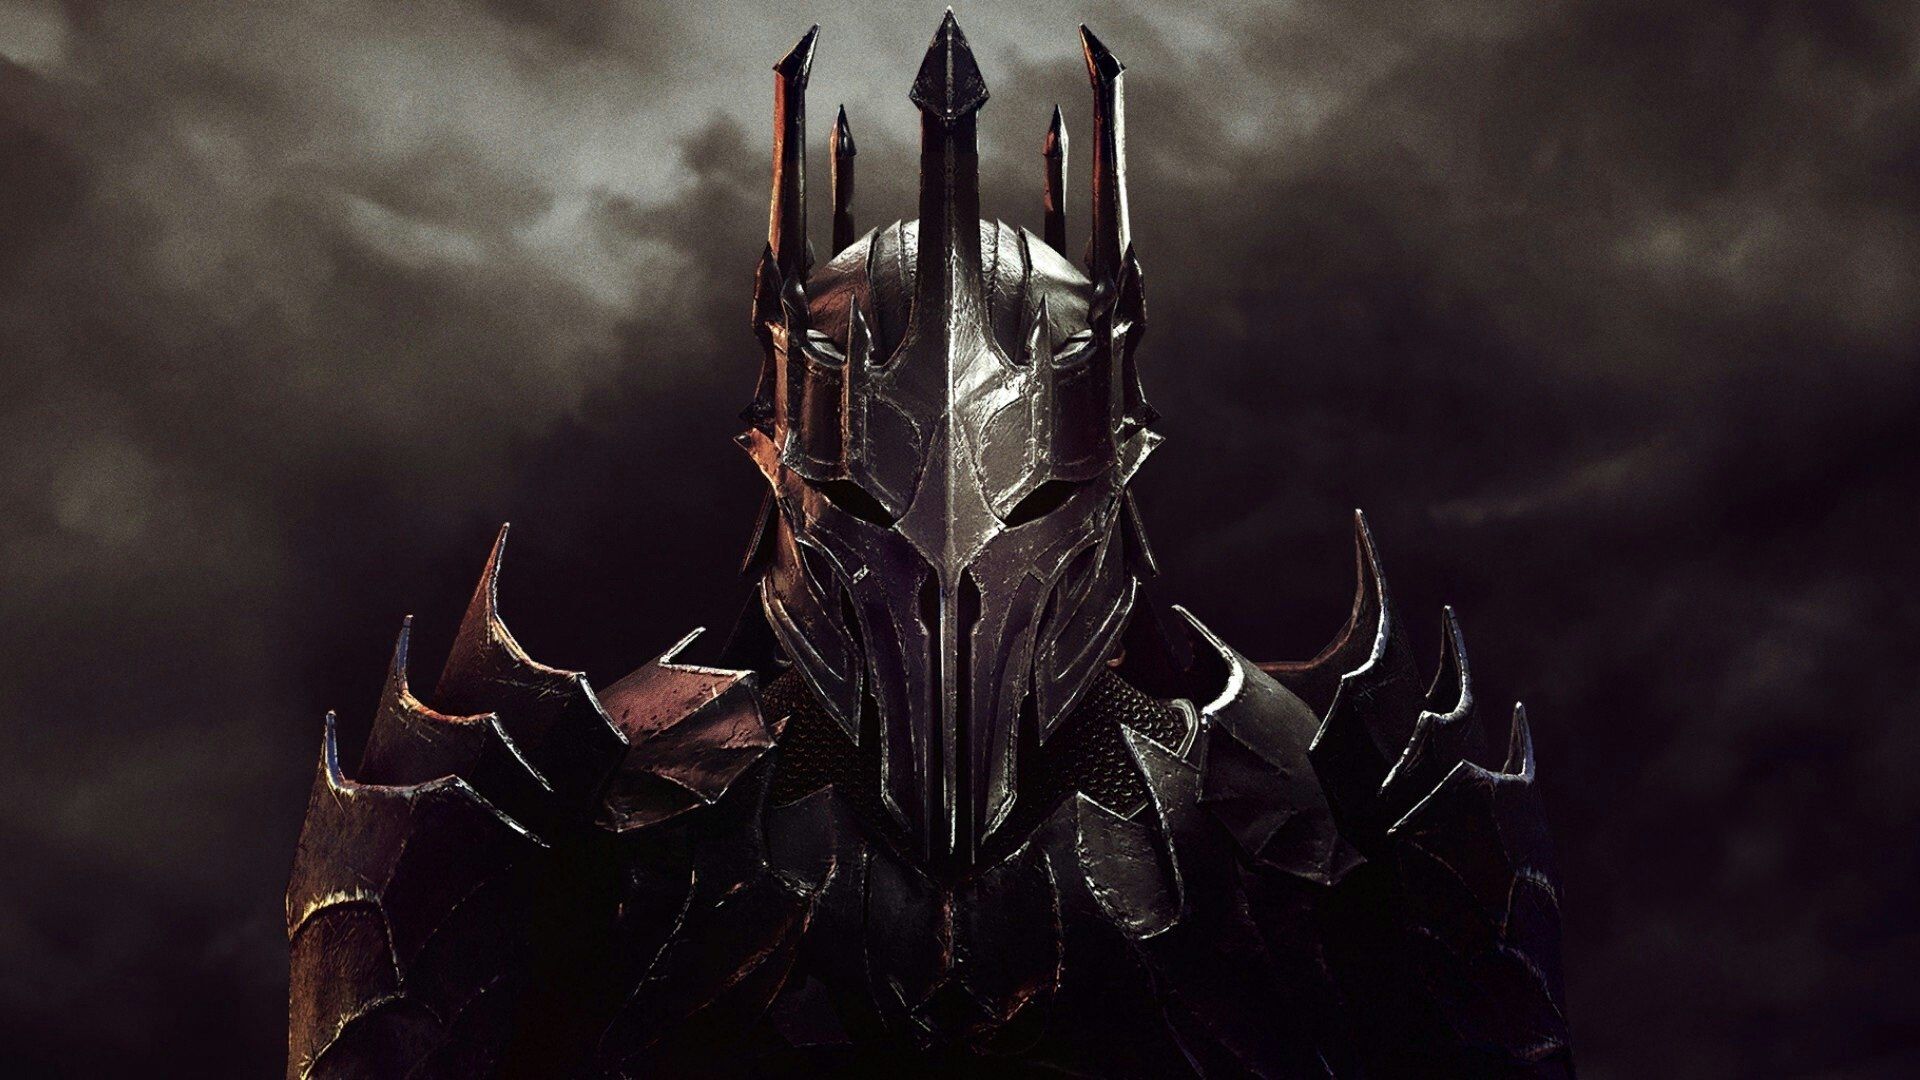 General 1920x1080 Sauron The Lord of the Rings fantasy art warrior dark frontal view portrait